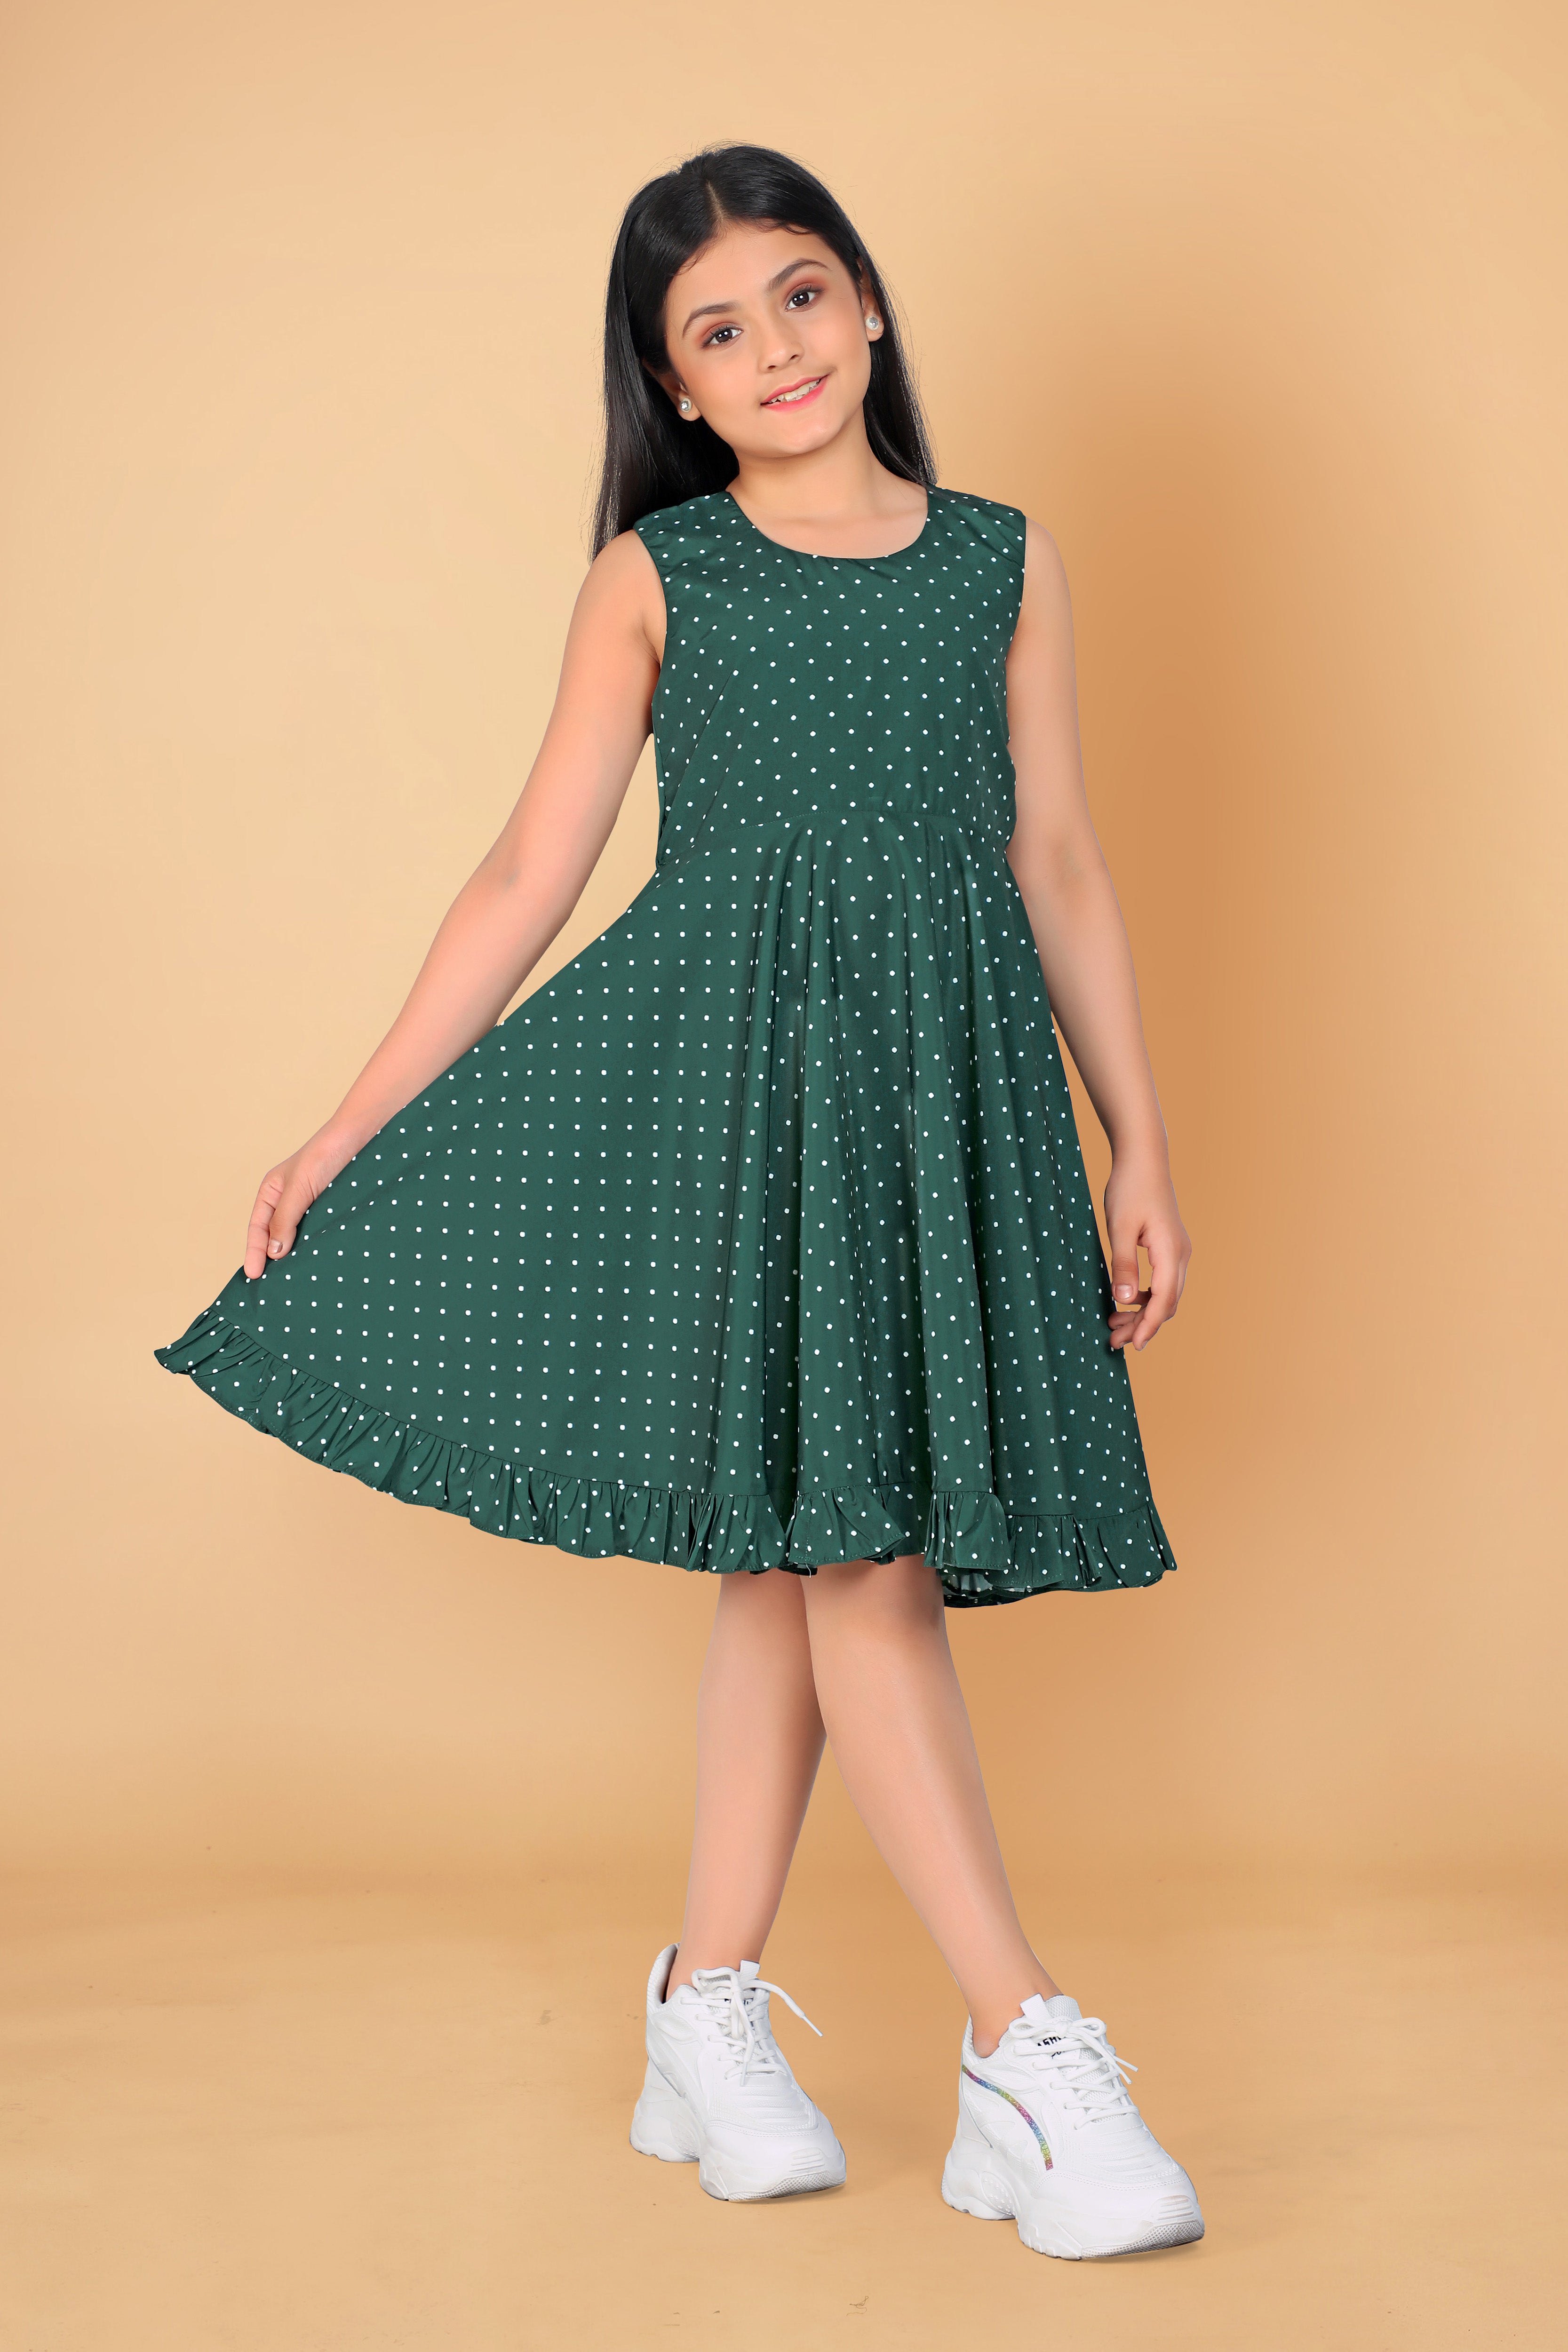 Buy Green Girls Dress Online In India  Etsy India